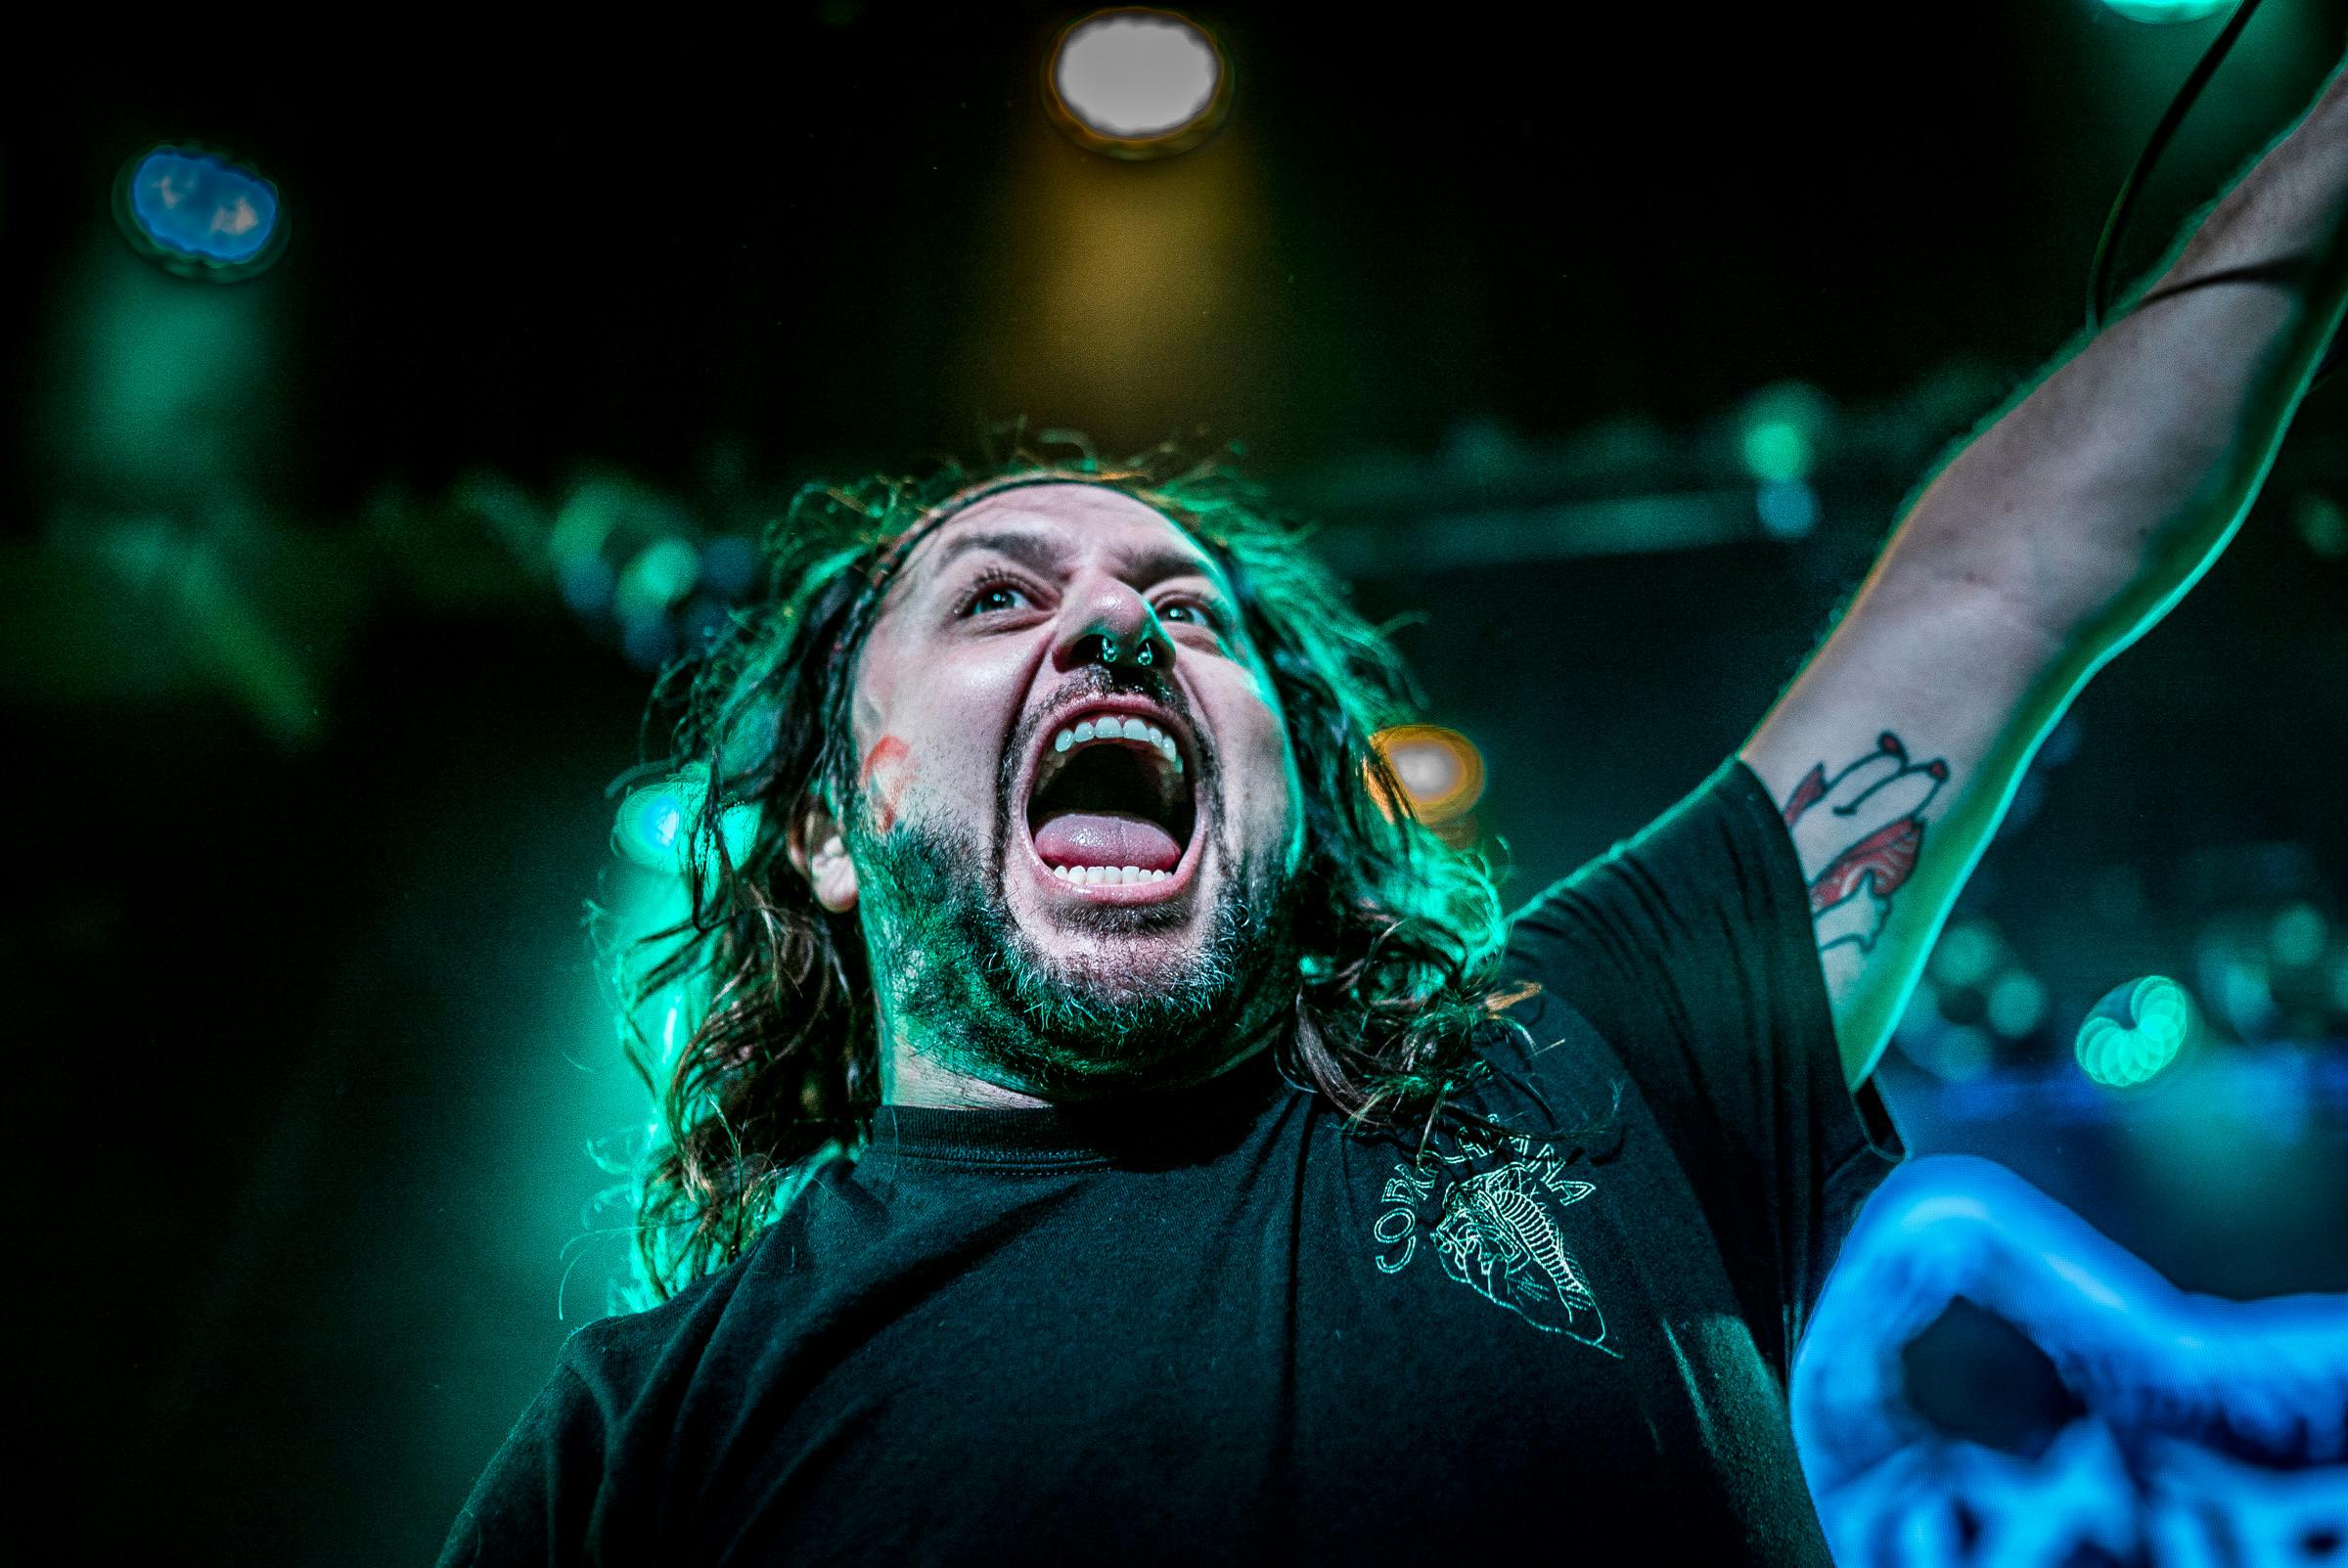 Municipal Waste and Napalm Death Announce Co-Headlining Tour With Sick Of It All and Take Offense